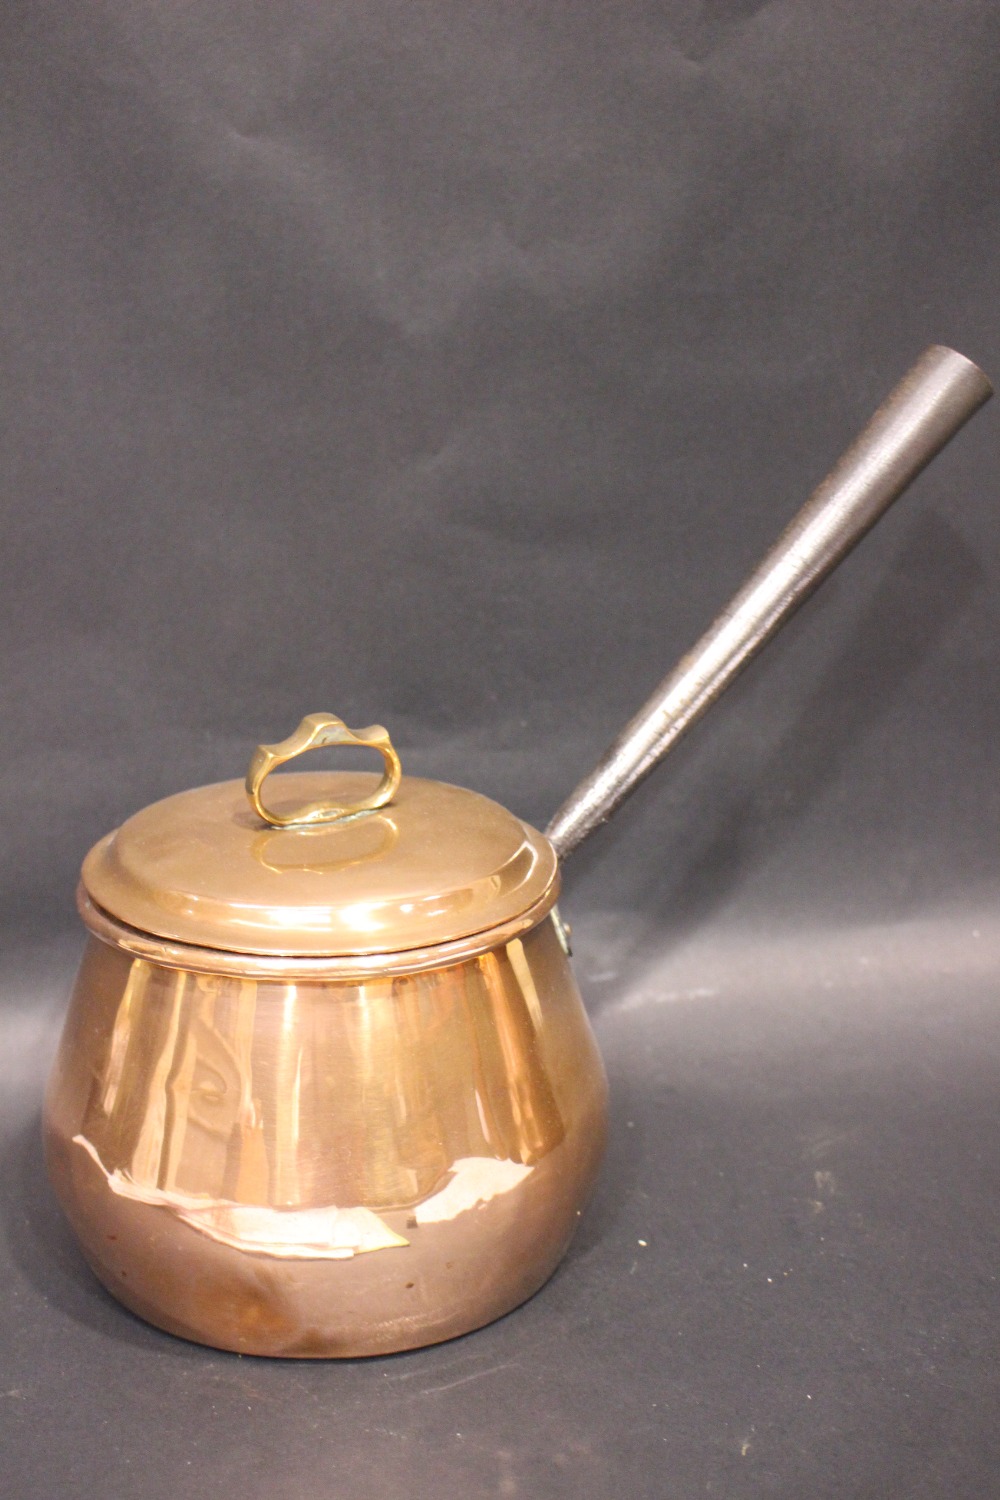 A COPPERWARE POT, with lid and cast iron handle, provenance came from the Bryan & Valarie Steele